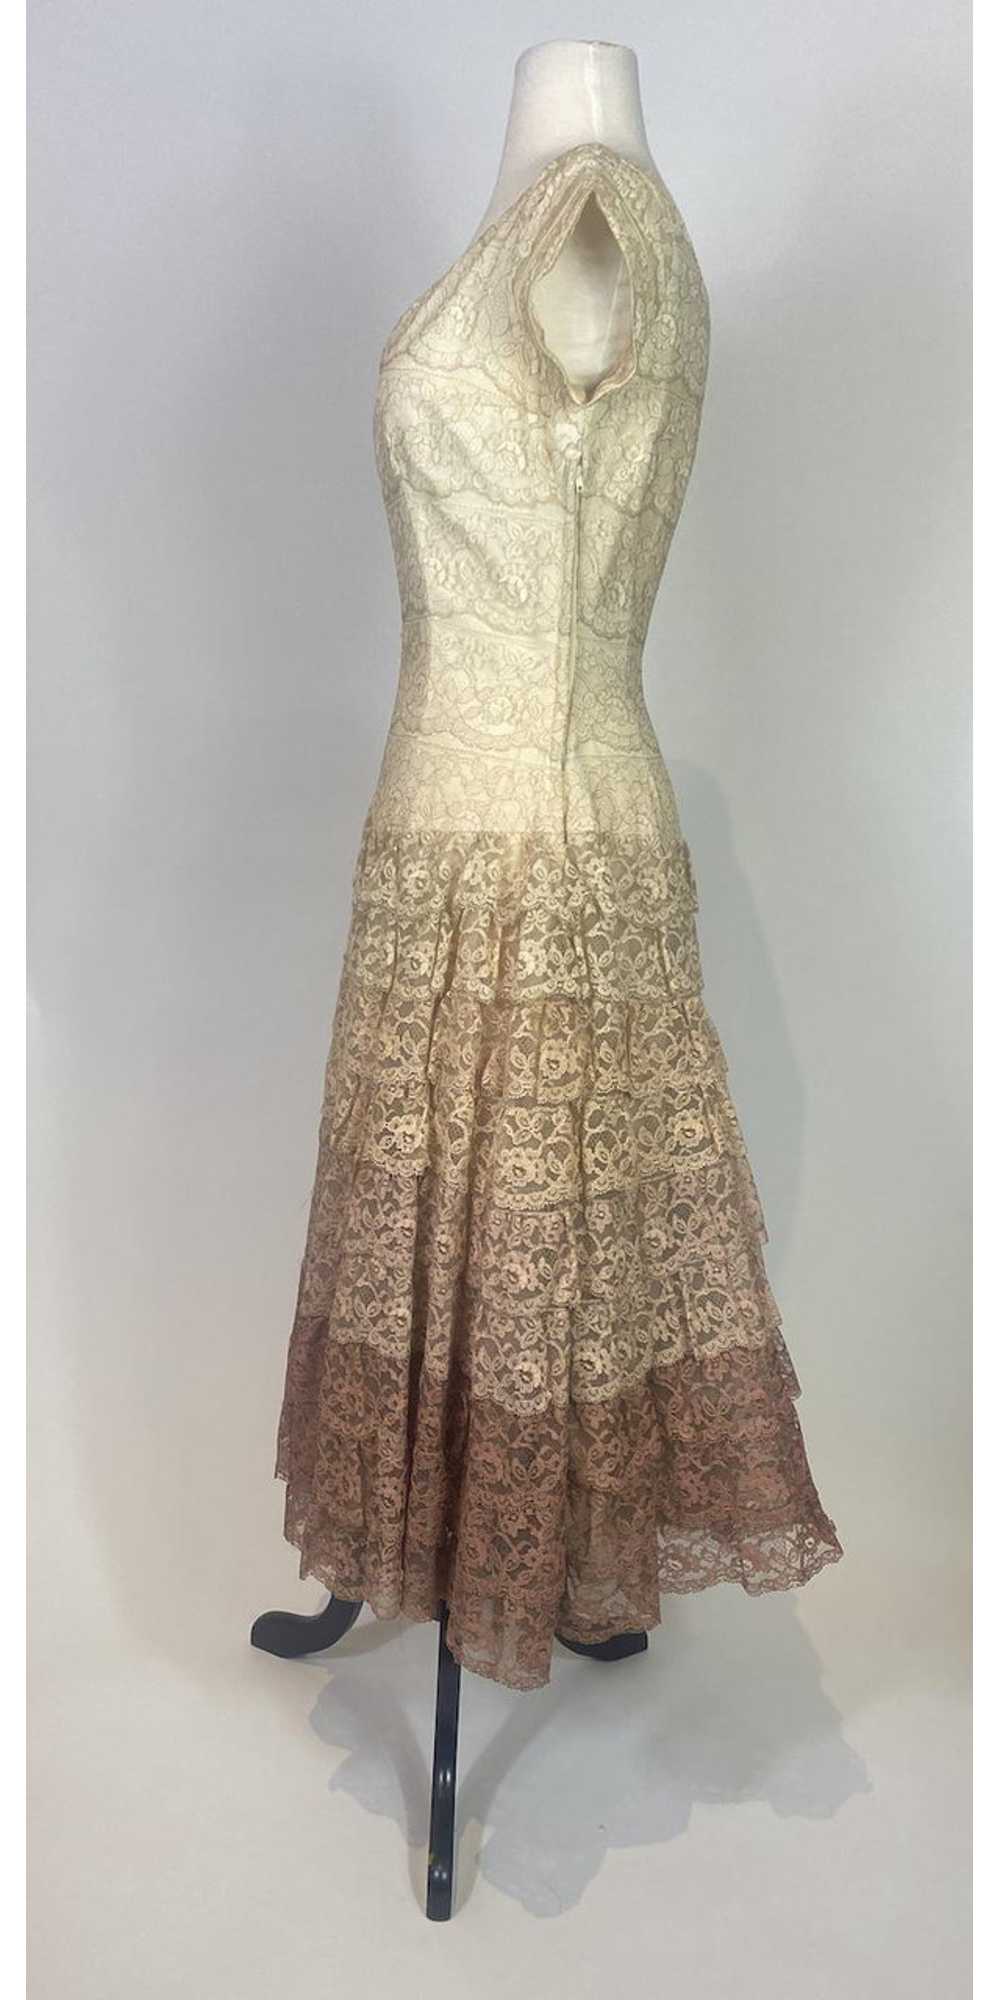 1950s Tiered Ombre Lace Swing Dress - image 4